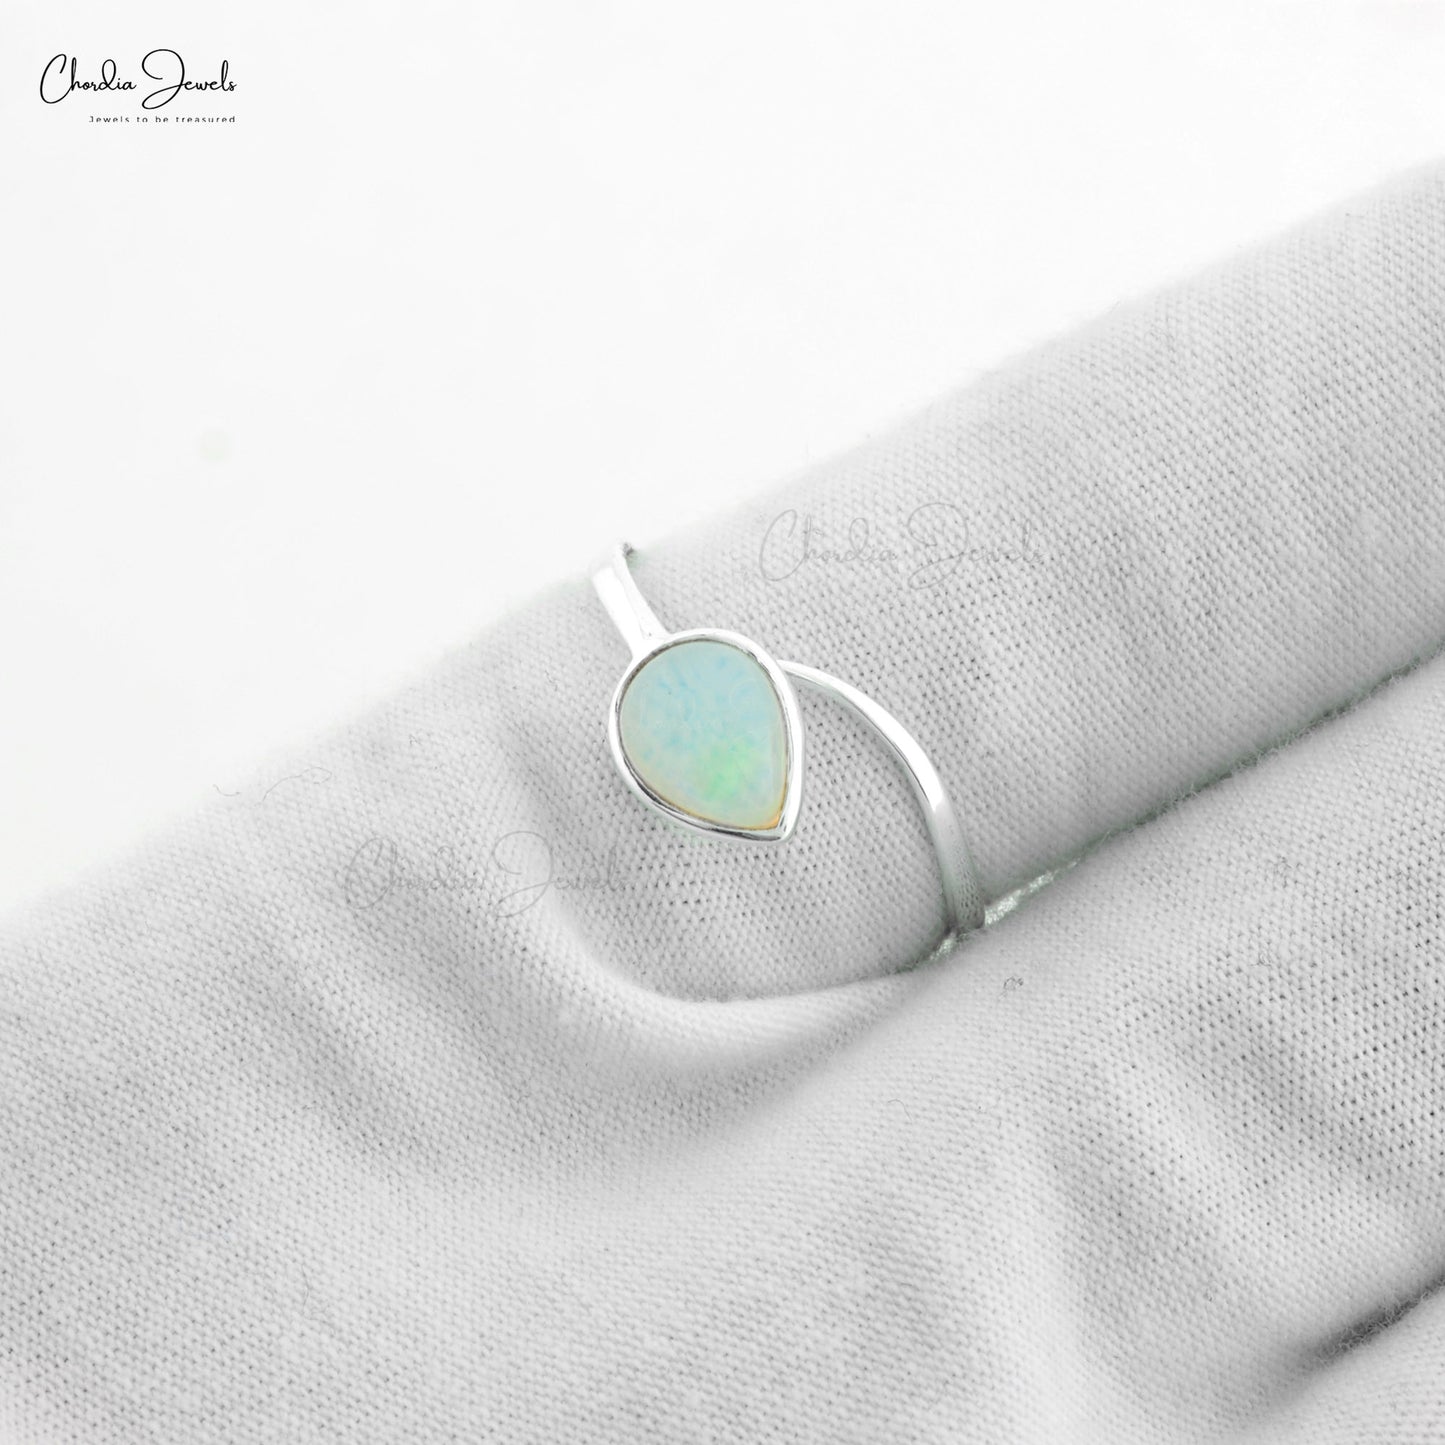 Fine Quality Jewelry At Offer Price Pear Cobochon Fire Opal Open Shank Adjustable Ring in 925 Sterling Silver for Women Solitaire Ring For Thank You Gift